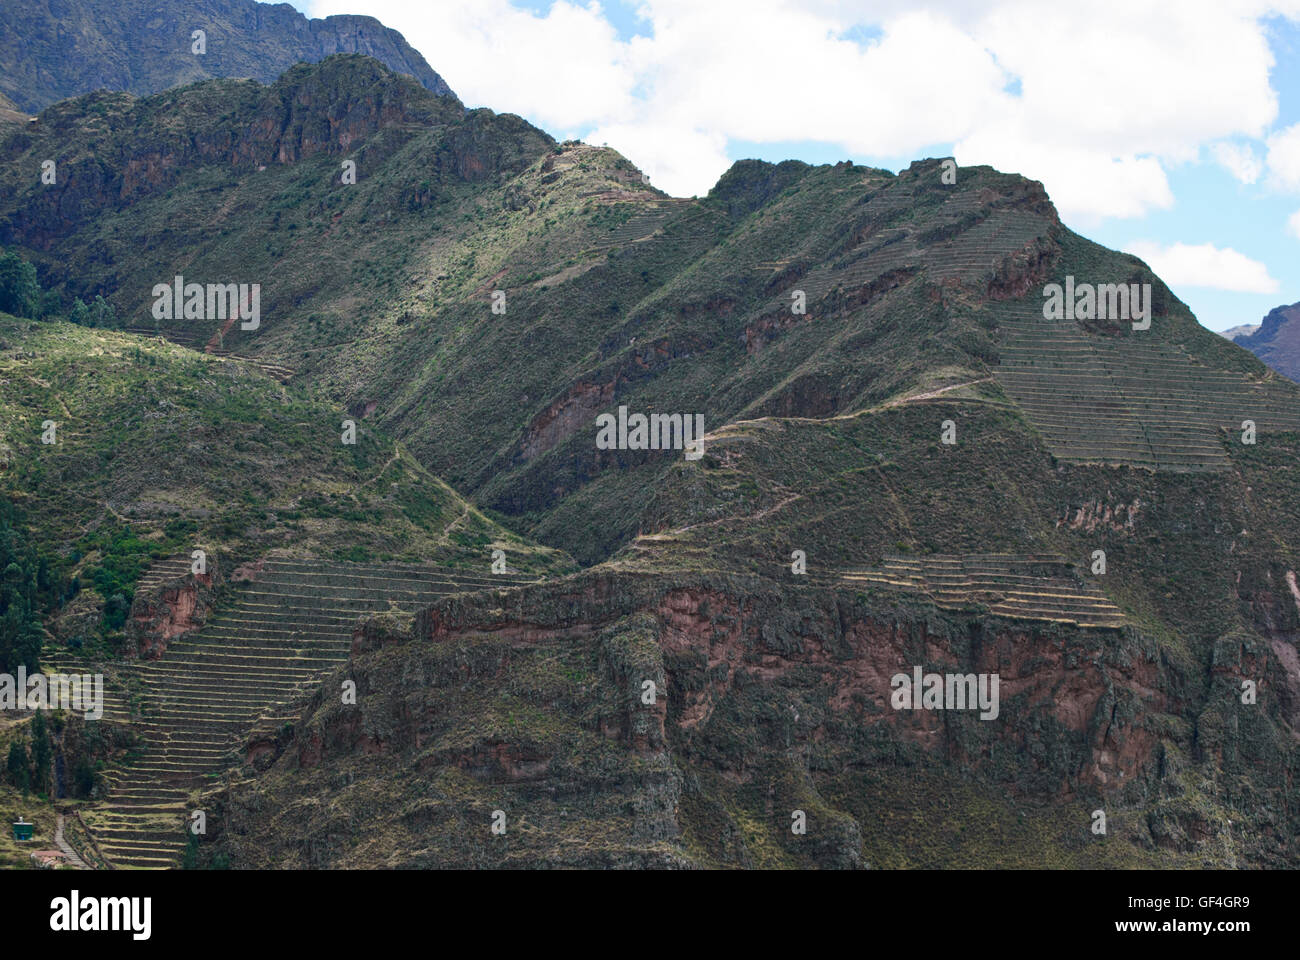 The agricultural terraces on the mountain ridge. Stock Photo